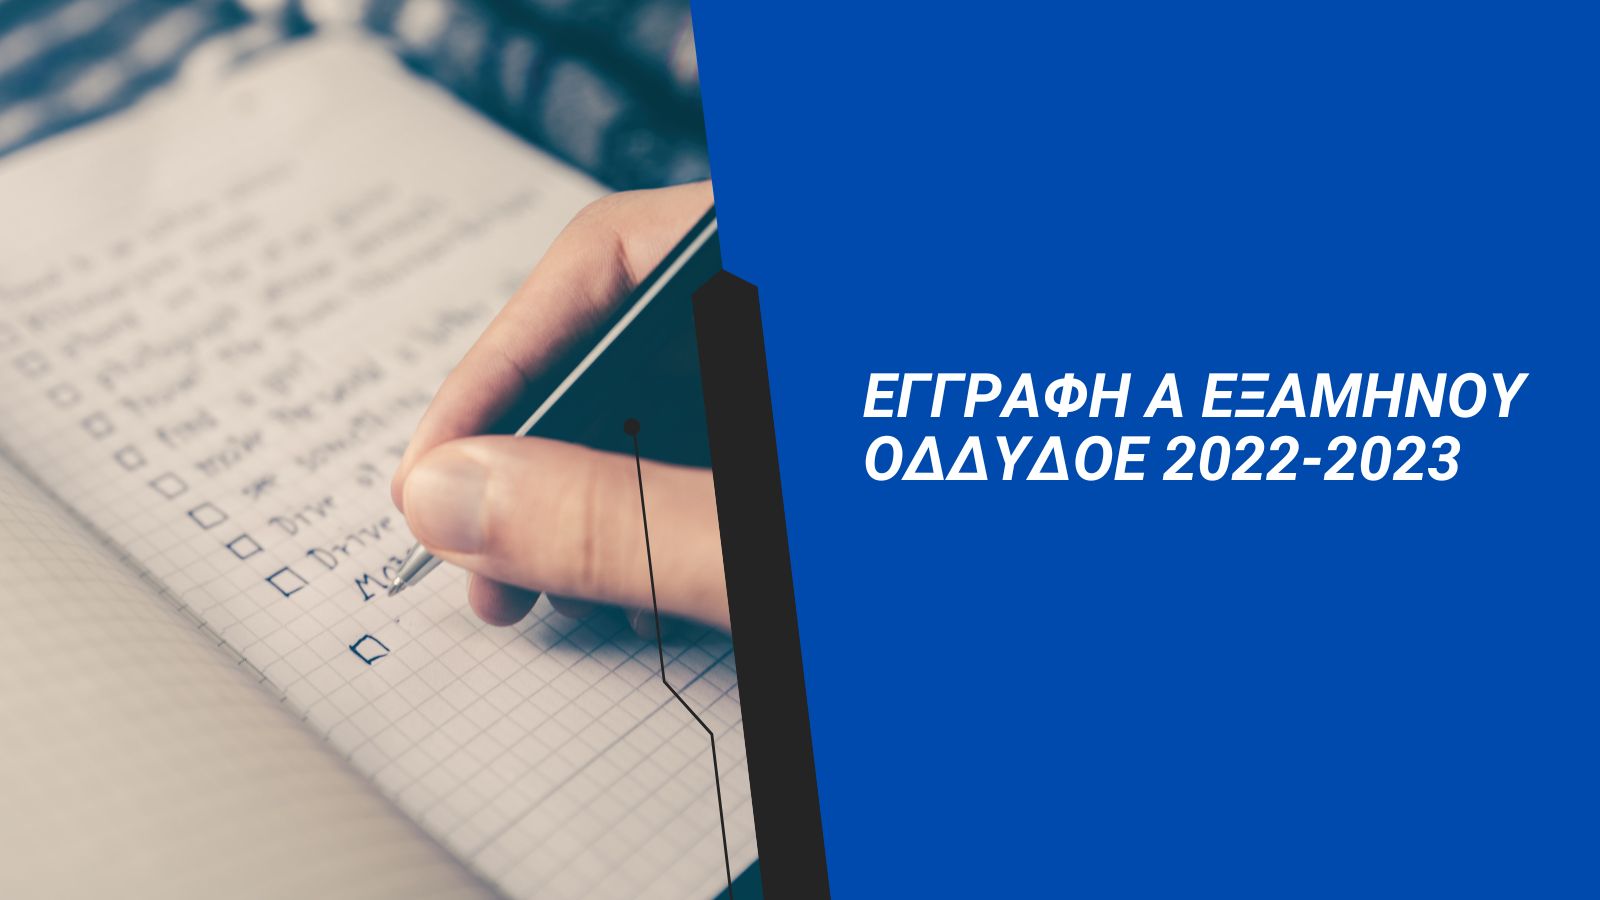 Read more about the article ΕΓΓΡΑΦΗ Α ΕΞΑΜΗΝΟΥ ΟΔΔΥΔΟΕ 2022-2023